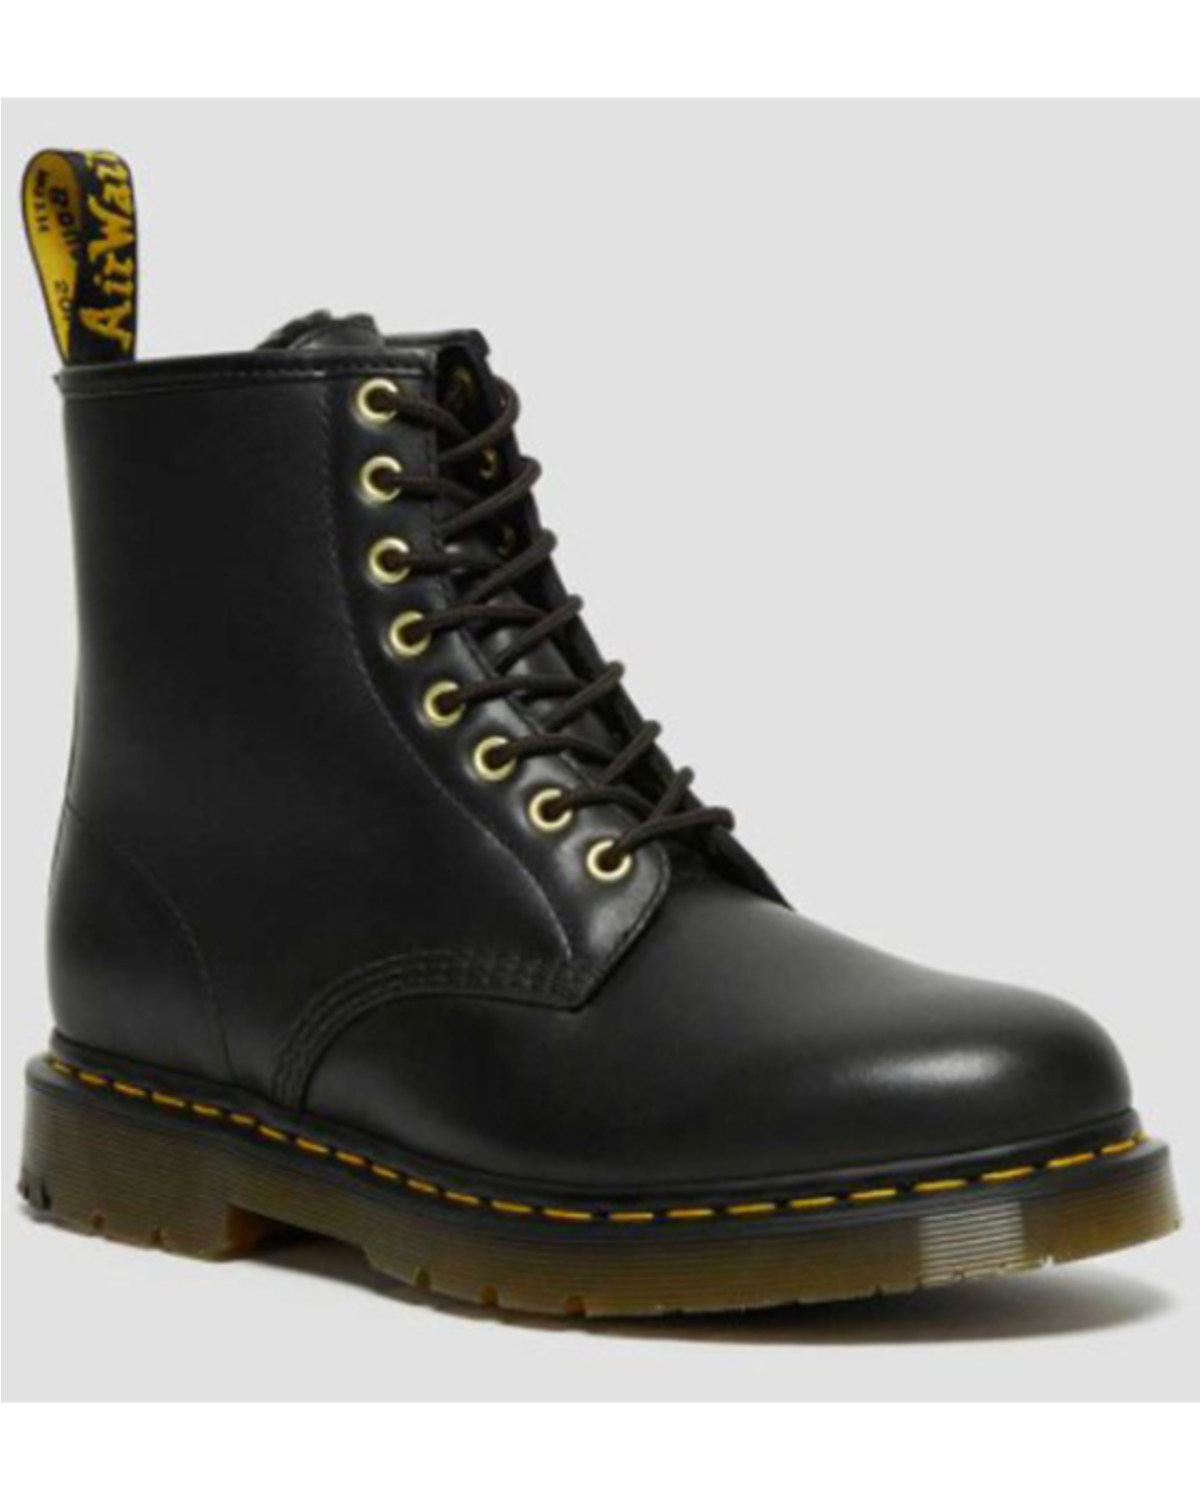 Dr. Martens 1460 Wintergrip Lacer Boots